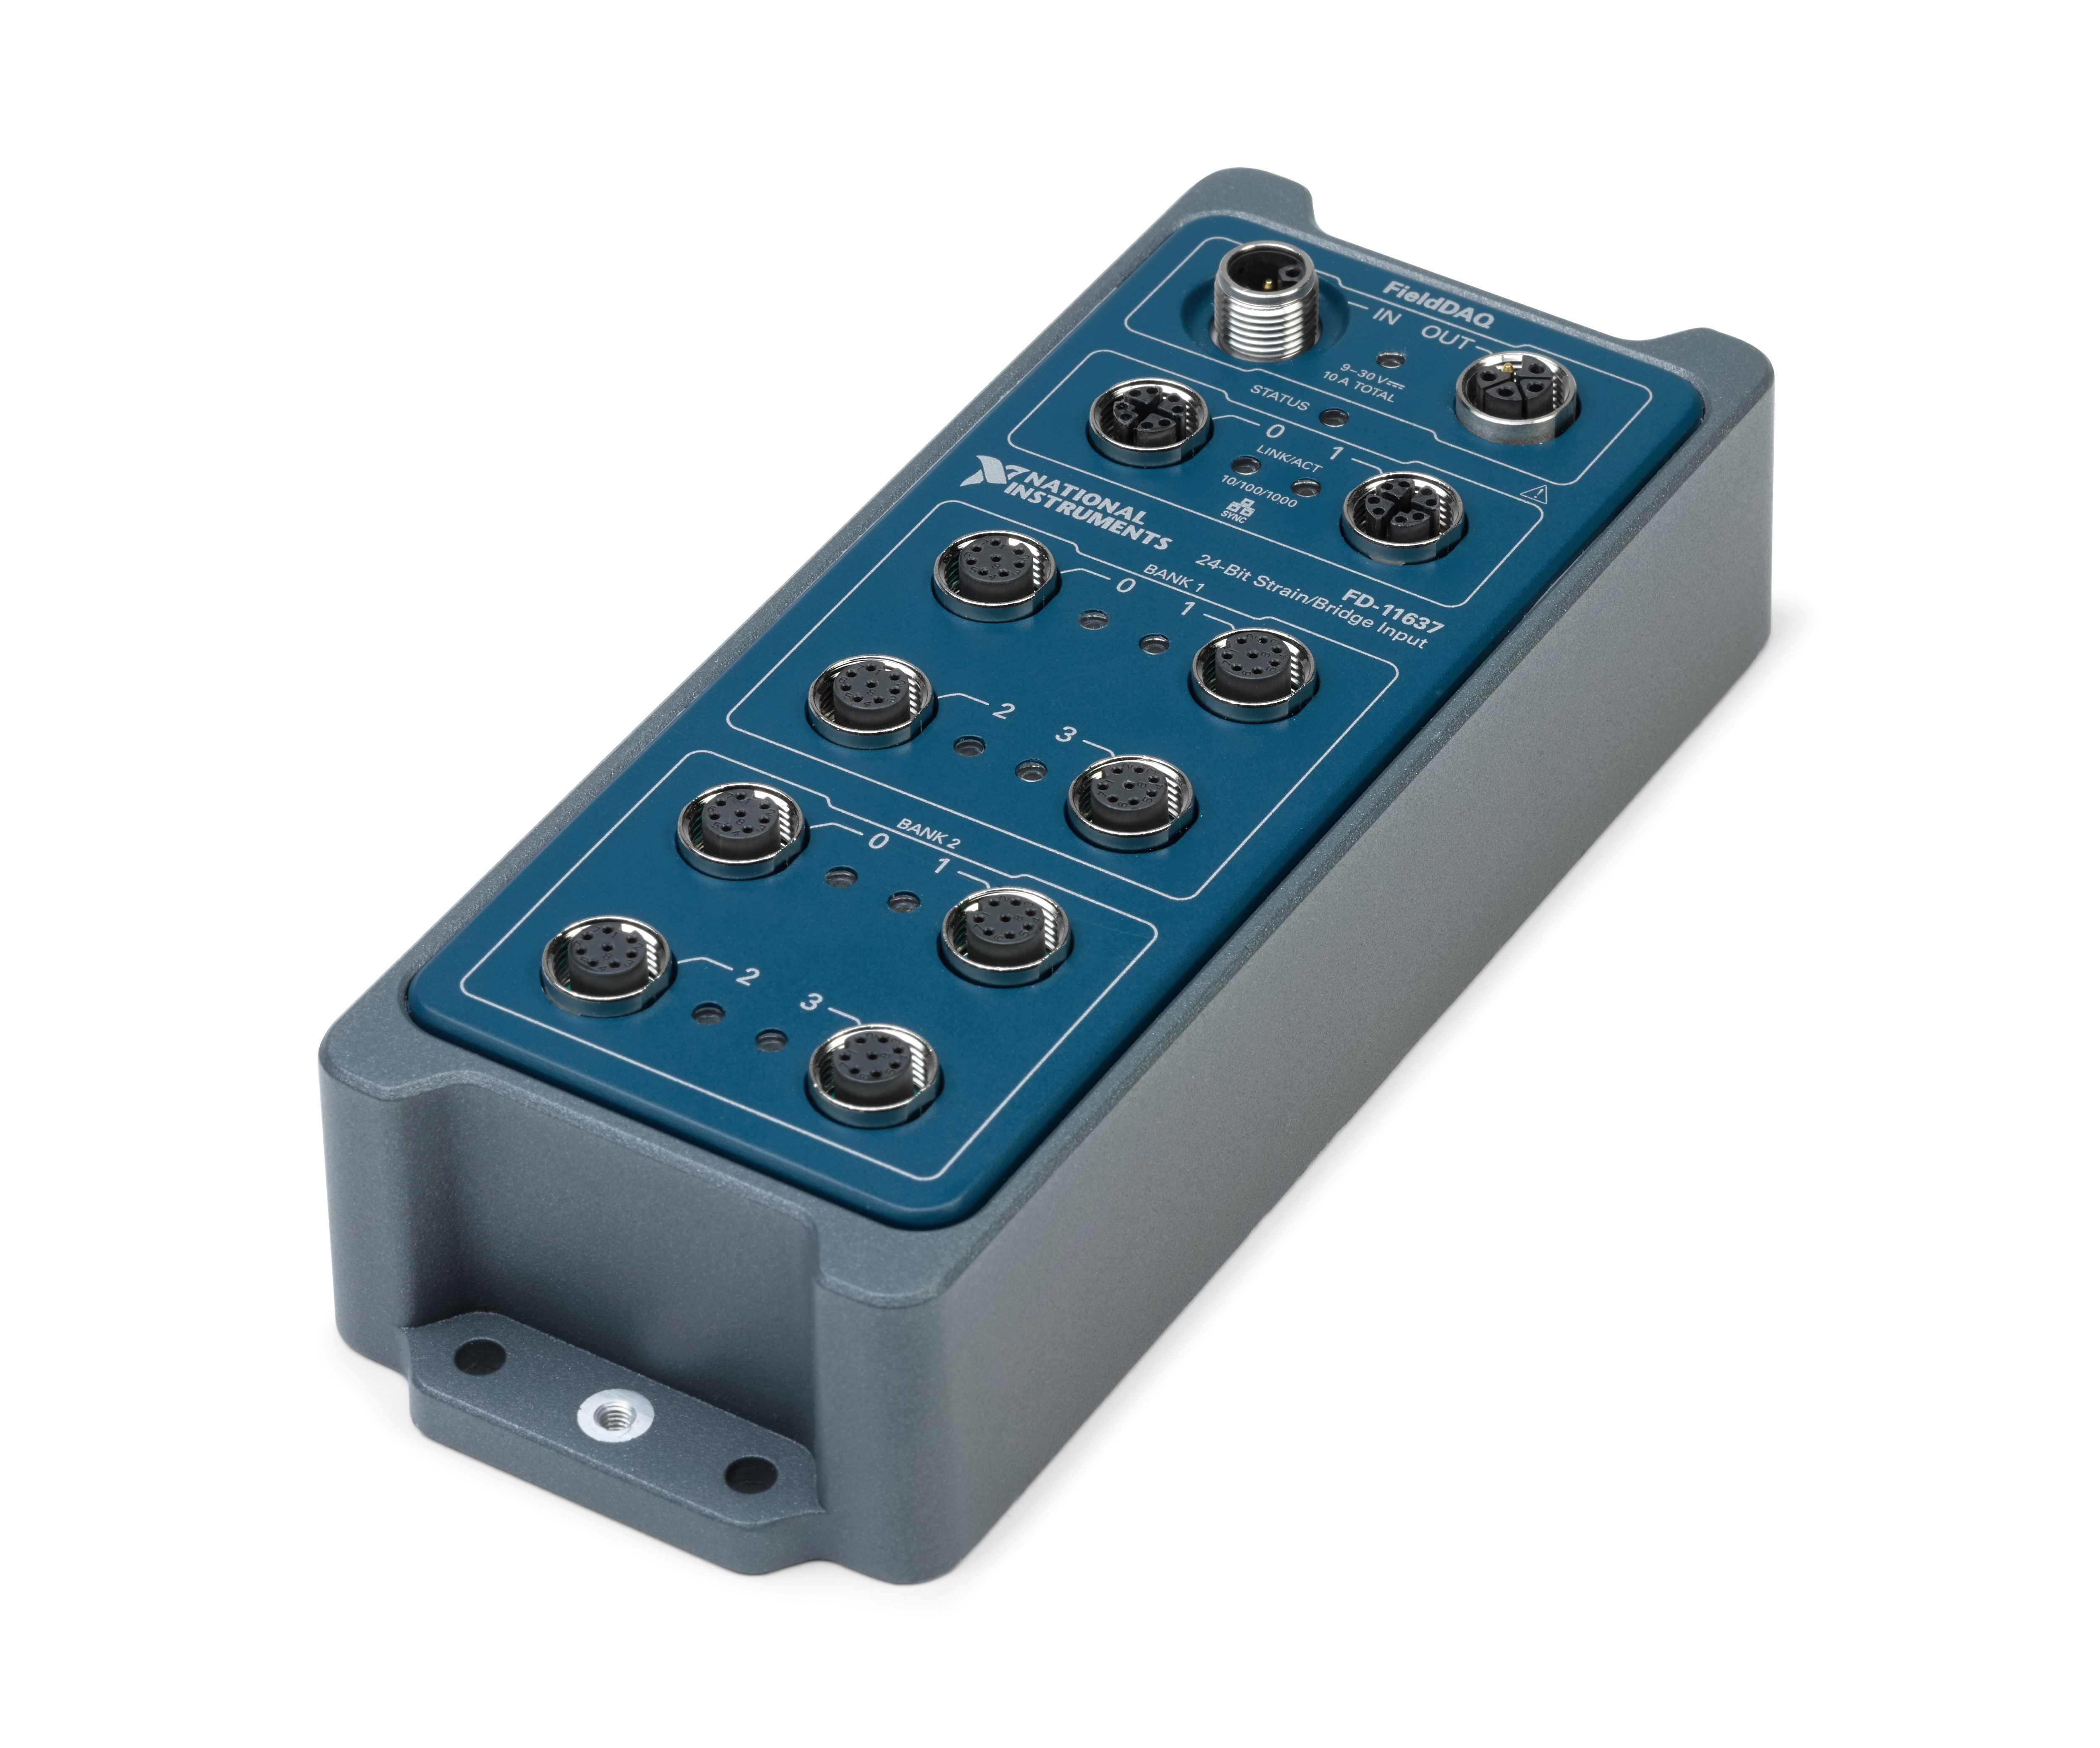 FieldDAQ is designed for the harsh environments of any application